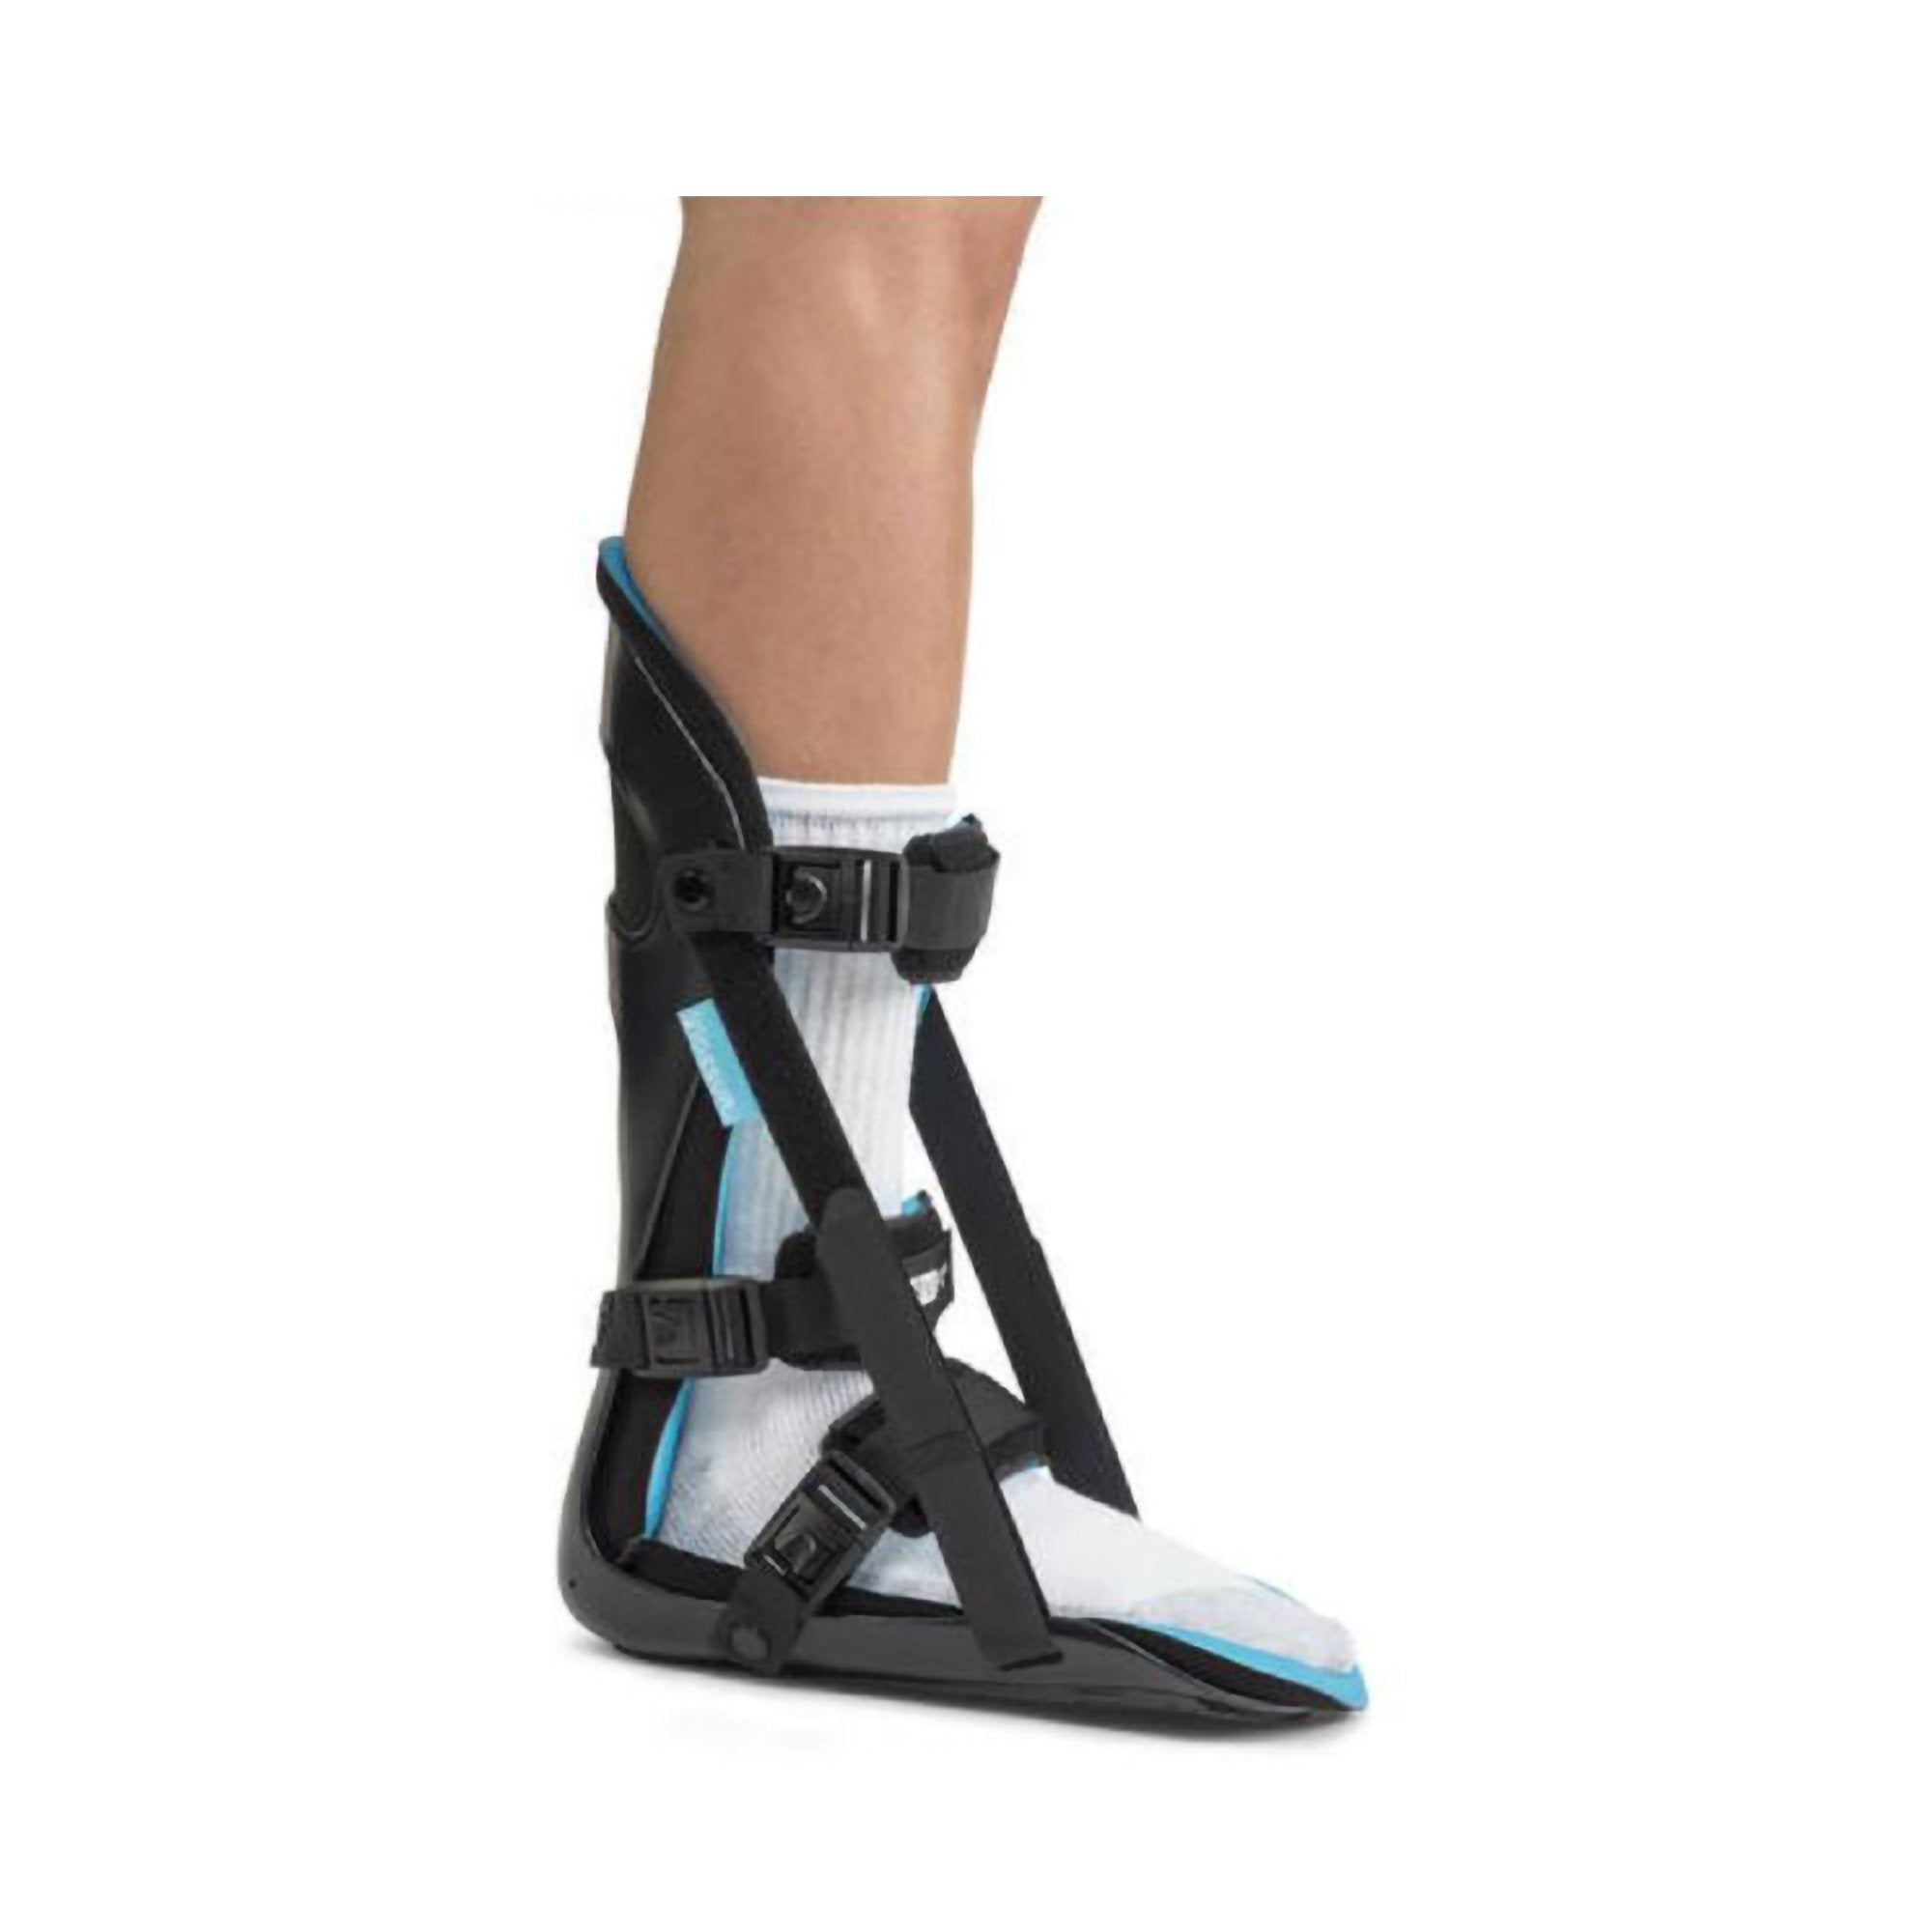 Night Splint Ossur® FormFit® Large Adjustable Strap / Buckle Closure Male 10-1/2 and Up / Female 11 and Up Foot